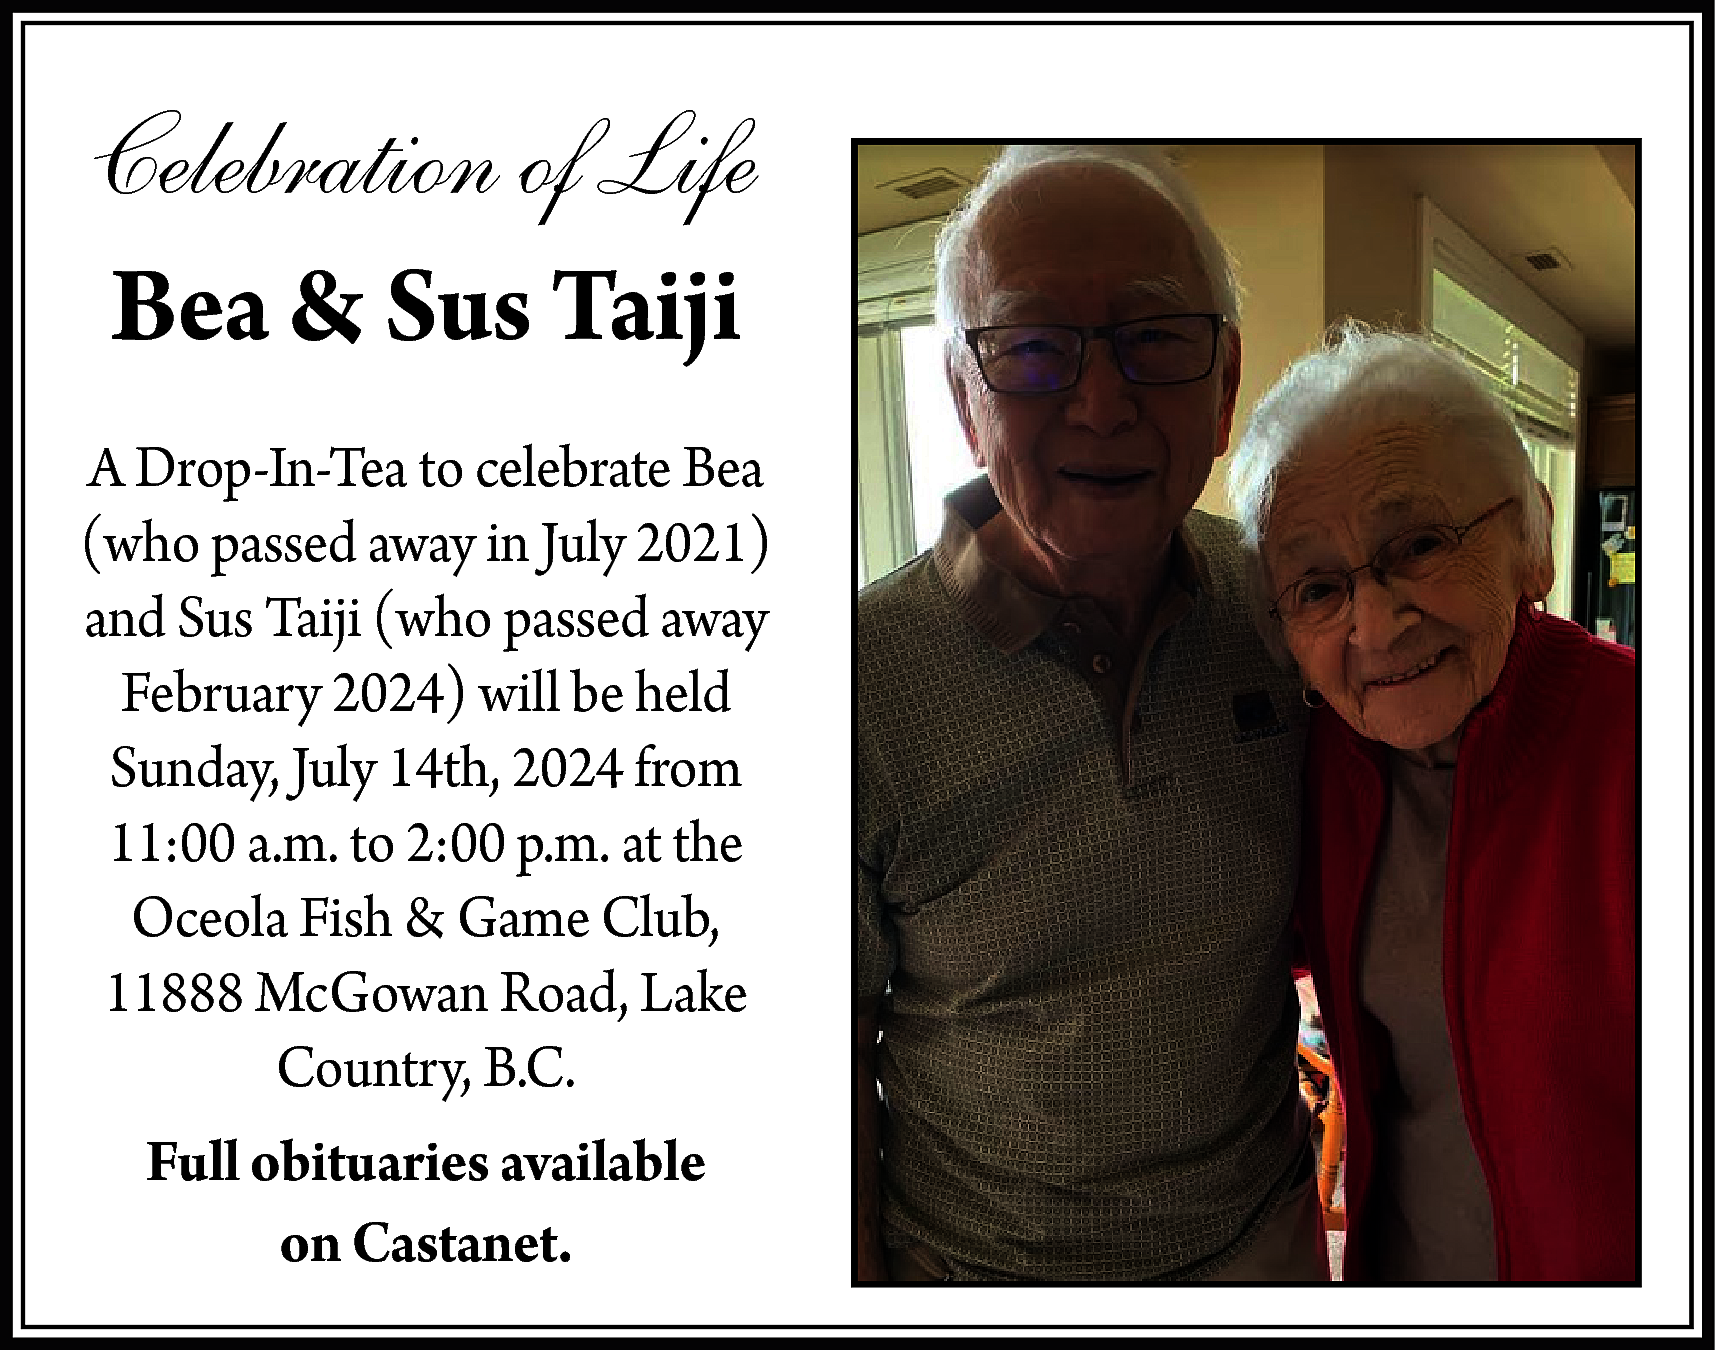 Celebration of Life <br>Bea &  Celebration of Life  Bea & Sus Taiji  A Drop-In-Tea to celebrate Bea  (who passed away in July 2021)  and Sus Taiji (who passed away  February 2024) will be held  Sunday, July 14th, 2024 from  11:00 a.m. to 2:00 p.m. at the  Oceola Fish & Game Club,  11888 McGowan Road, Lake  Country, B.C.  Full obituaries available  on Castanet.    